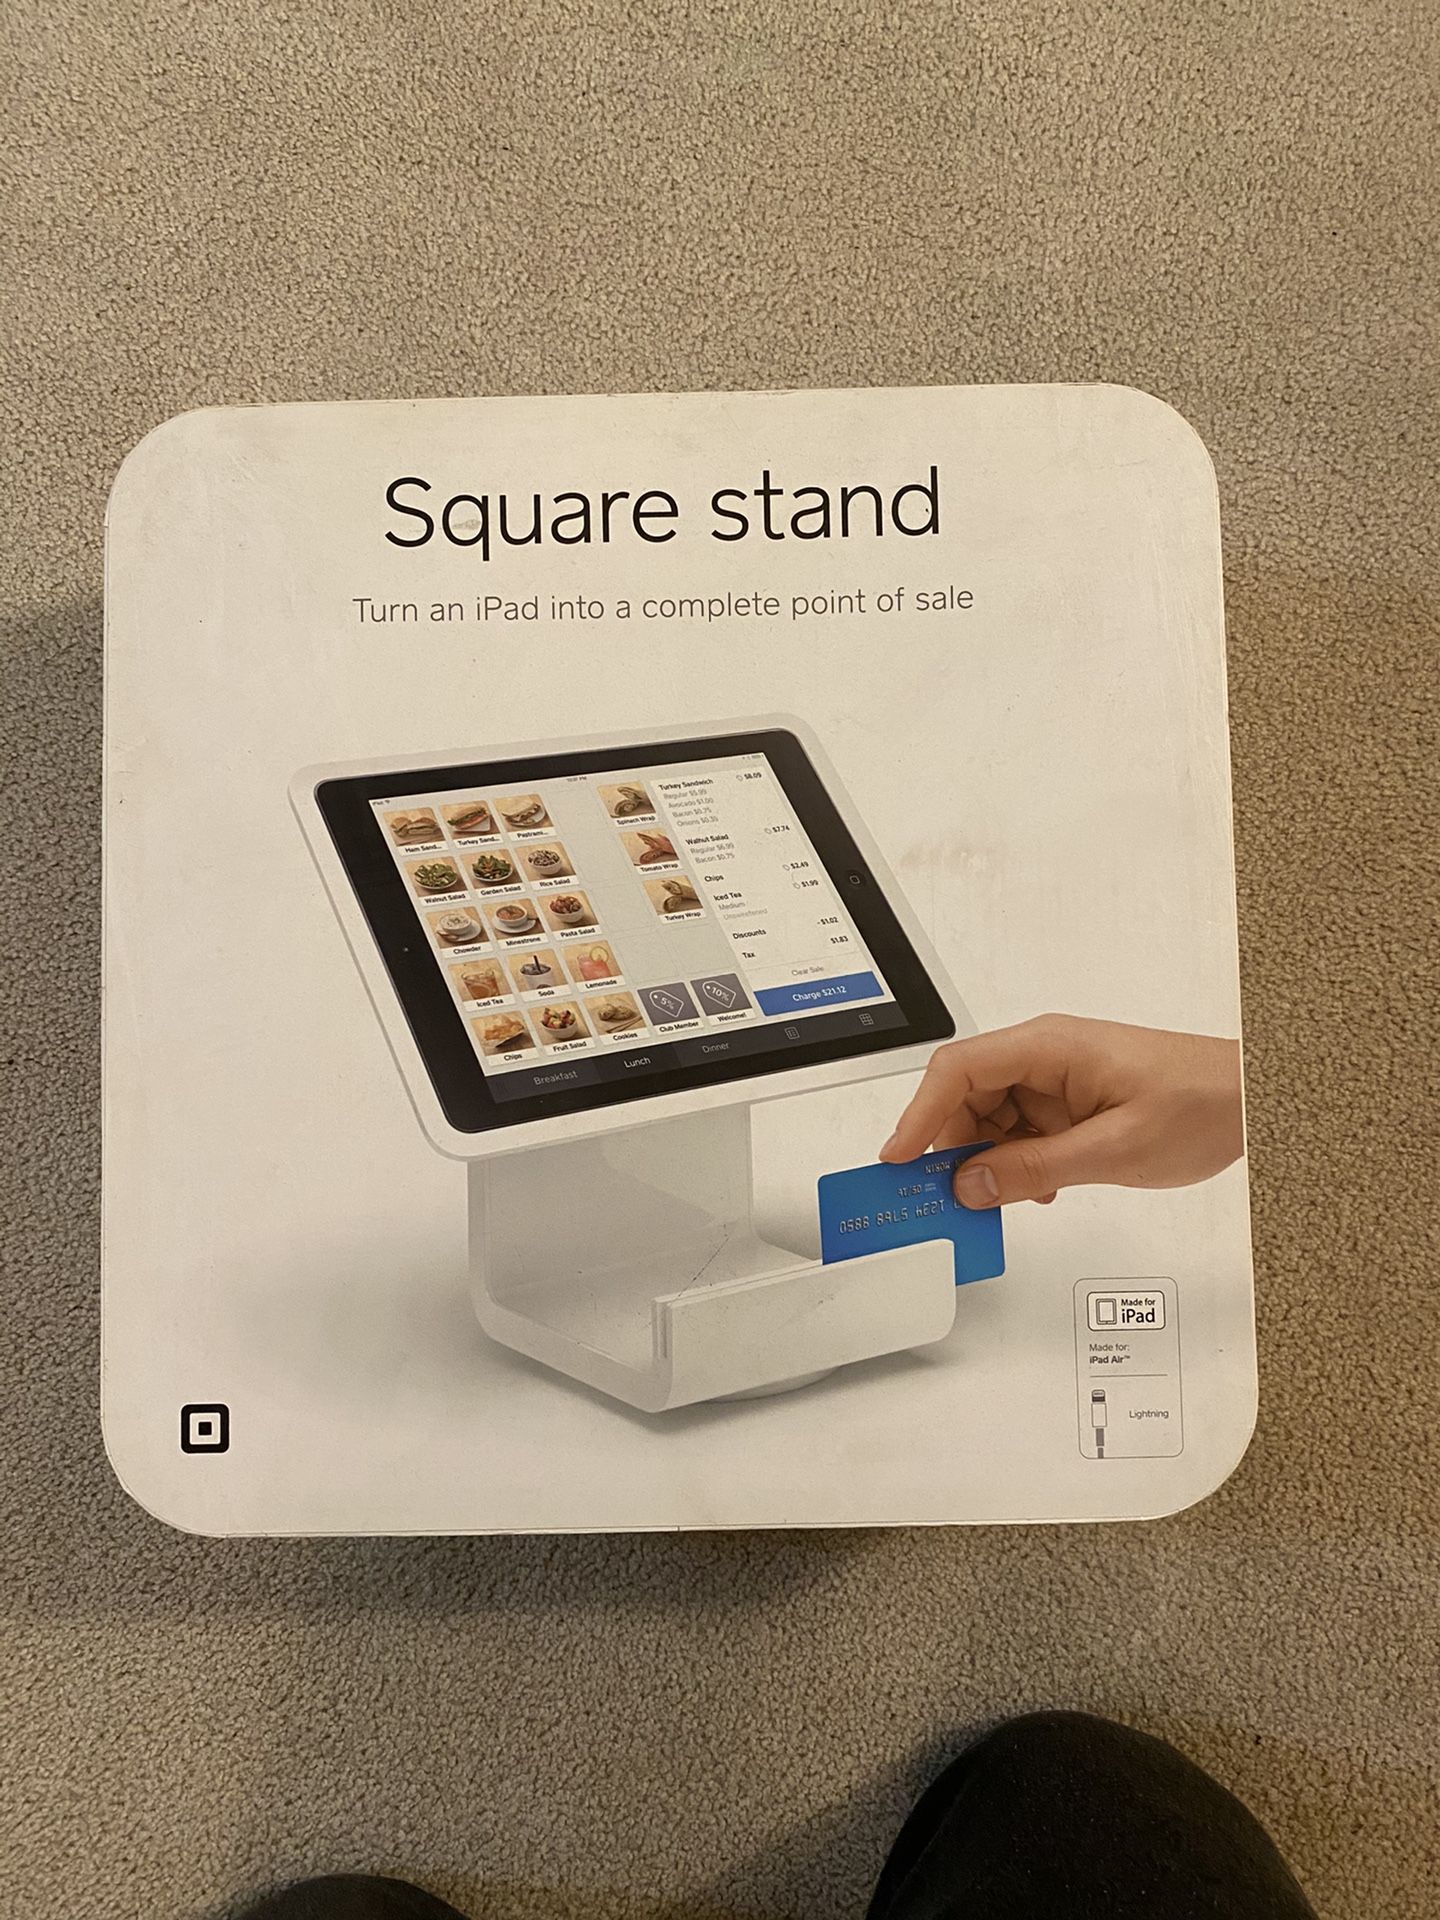 Square stand for $63